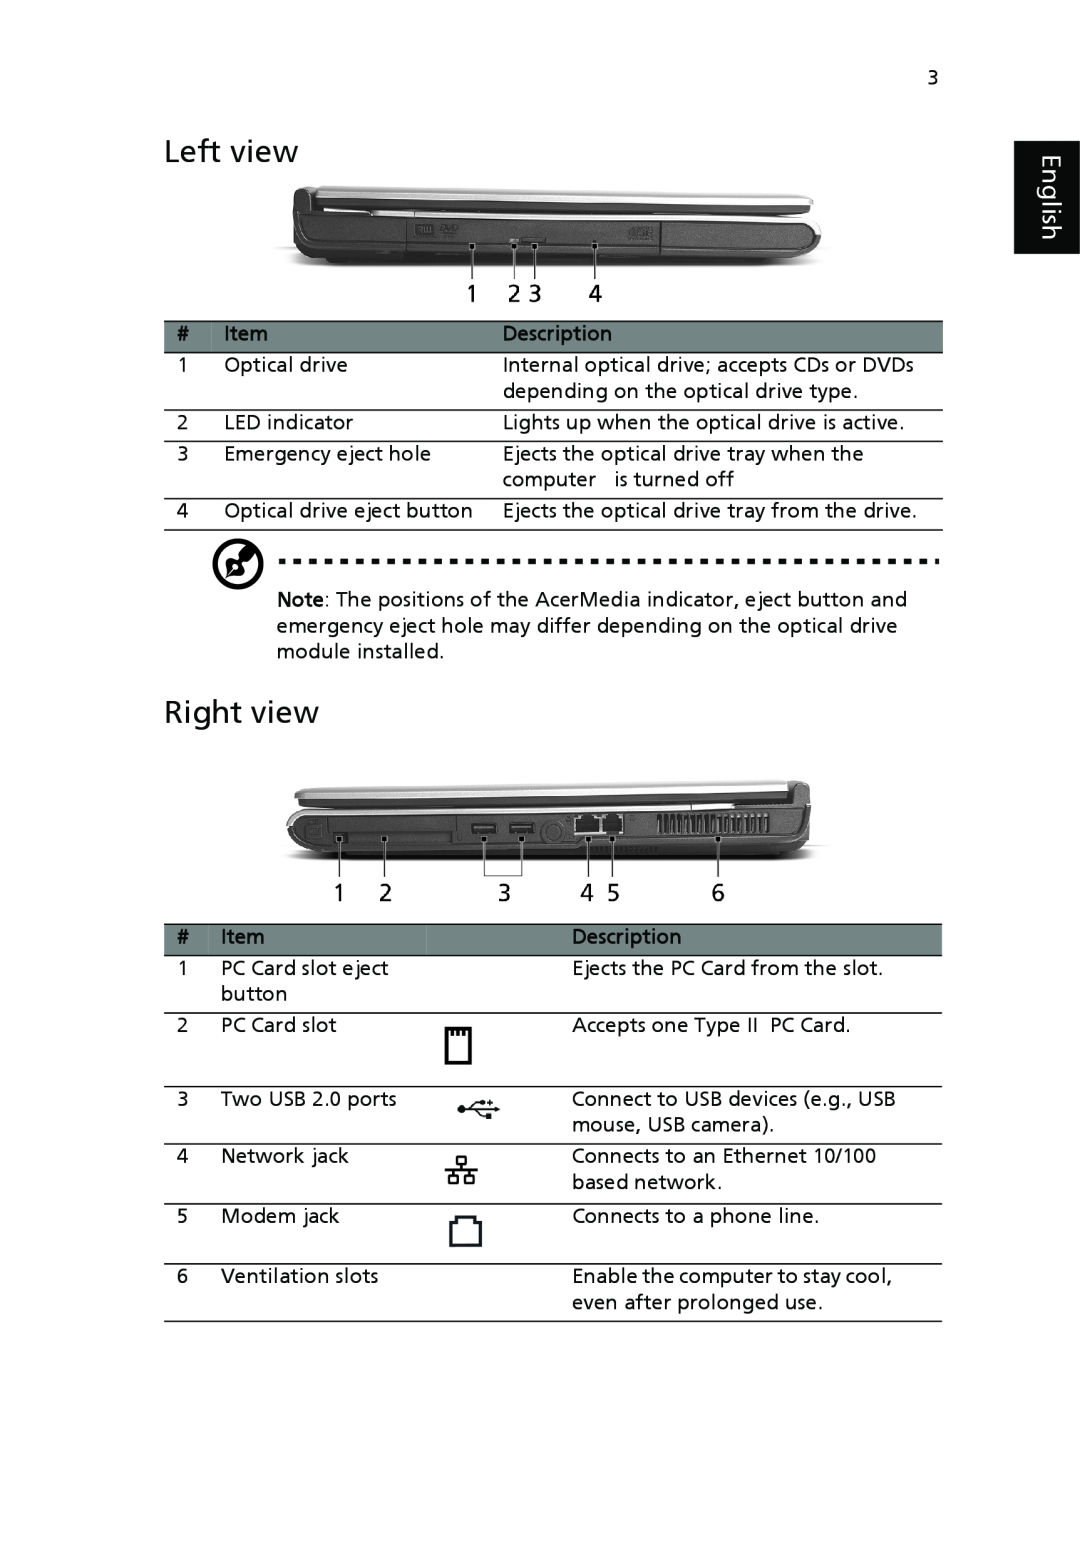 Acer 2310 Series manual Left view, Right view, English 